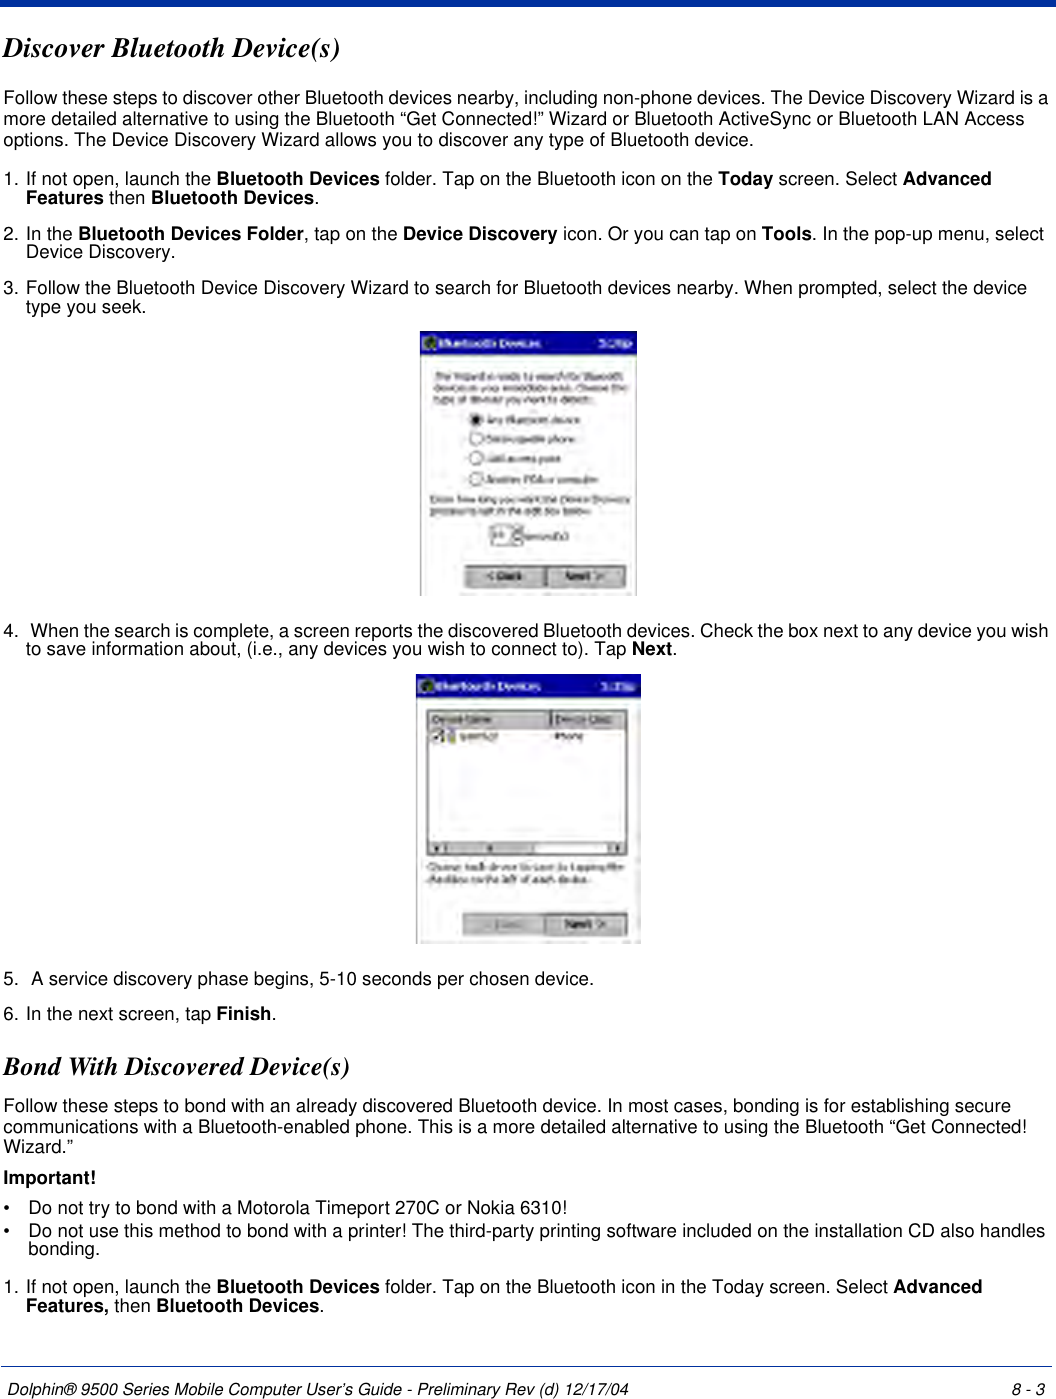 Dolphin® 9500 Series Mobile Computer User’s Guide - Preliminary Rev (d) 12/17/04 8 - 3Discover Bluetooth Device(s)Follow these steps to discover other Bluetooth devices nearby, including non-phone devices. The Device Discovery Wizard is a more detailed alternative to using the Bluetooth “Get Connected!” Wizard or Bluetooth ActiveSync or Bluetooth LAN Access options. The Device Discovery Wizard allows you to discover any type of Bluetooth device.1. If not open, launch the Bluetooth Devices folder. Tap on the Bluetooth icon on the Today screen. Select Advanced Features then Bluetooth Devices.2. In the Bluetooth Devices Folder, tap on the Device Discovery icon. Or you can tap on Tools. In the pop-up menu, select Device Discovery.3. Follow the Bluetooth Device Discovery Wizard to search for Bluetooth devices nearby. When prompted, select the device type you seek.4.  When the search is complete, a screen reports the discovered Bluetooth devices. Check the box next to any device you wish to save information about, (i.e., any devices you wish to connect to). Tap Next.5.  A service discovery phase begins, 5-10 seconds per chosen device.6. In the next screen, tap Finish.Bond With Discovered Device(s)Follow these steps to bond with an already discovered Bluetooth device. In most cases, bonding is for establishing secure communications with a Bluetooth-enabled phone. This is a more detailed alternative to using the Bluetooth “Get Connected! Wizard.”Important!•           Do not try to bond with a Motorola Timeport 270C or Nokia 6310!•           Do not use this method to bond with a printer! The third-party printing software included on the installation CD also handles bonding.1. If not open, launch the Bluetooth Devices folder. Tap on the Bluetooth icon in the Today screen. Select Advanced Features, then Bluetooth Devices.